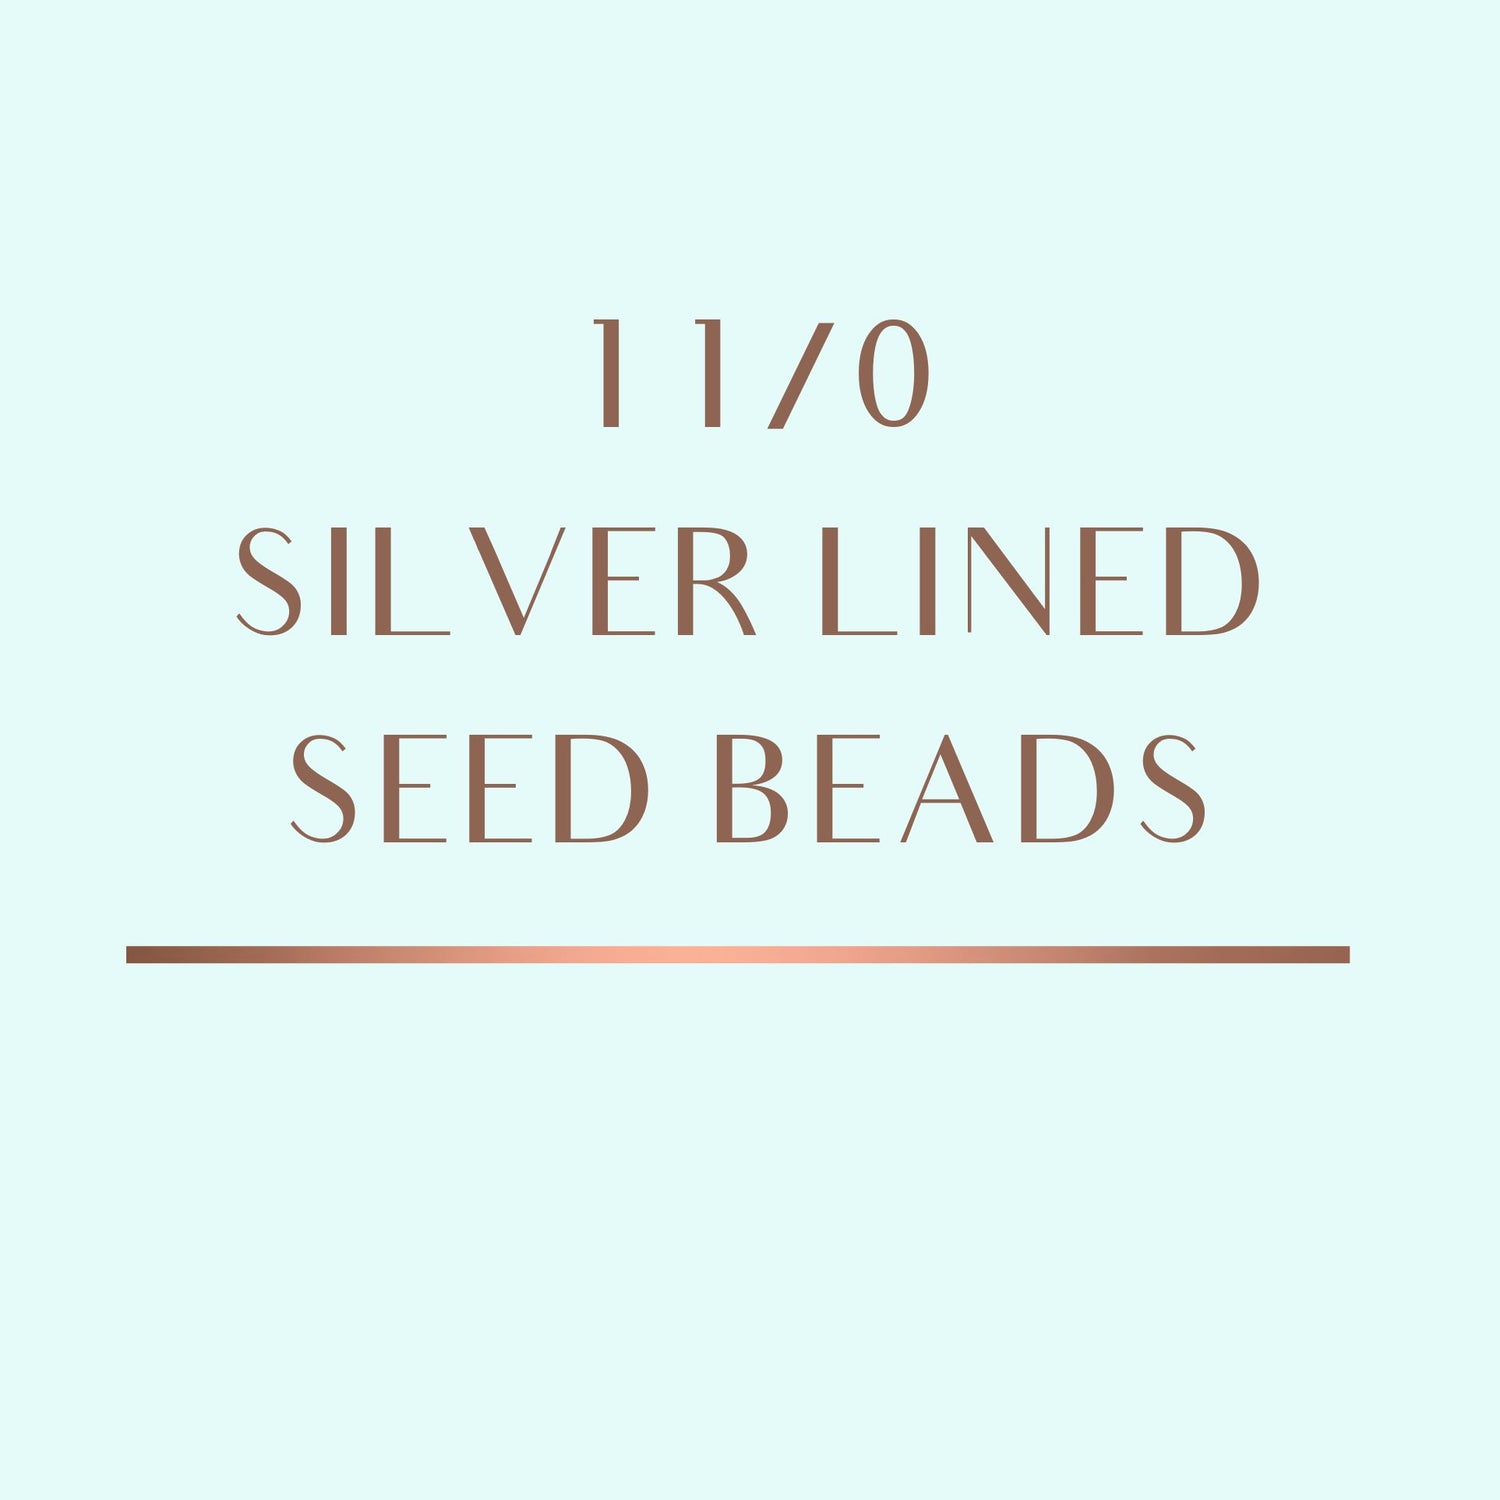 11/0 SILVER LINED SEED BEADS